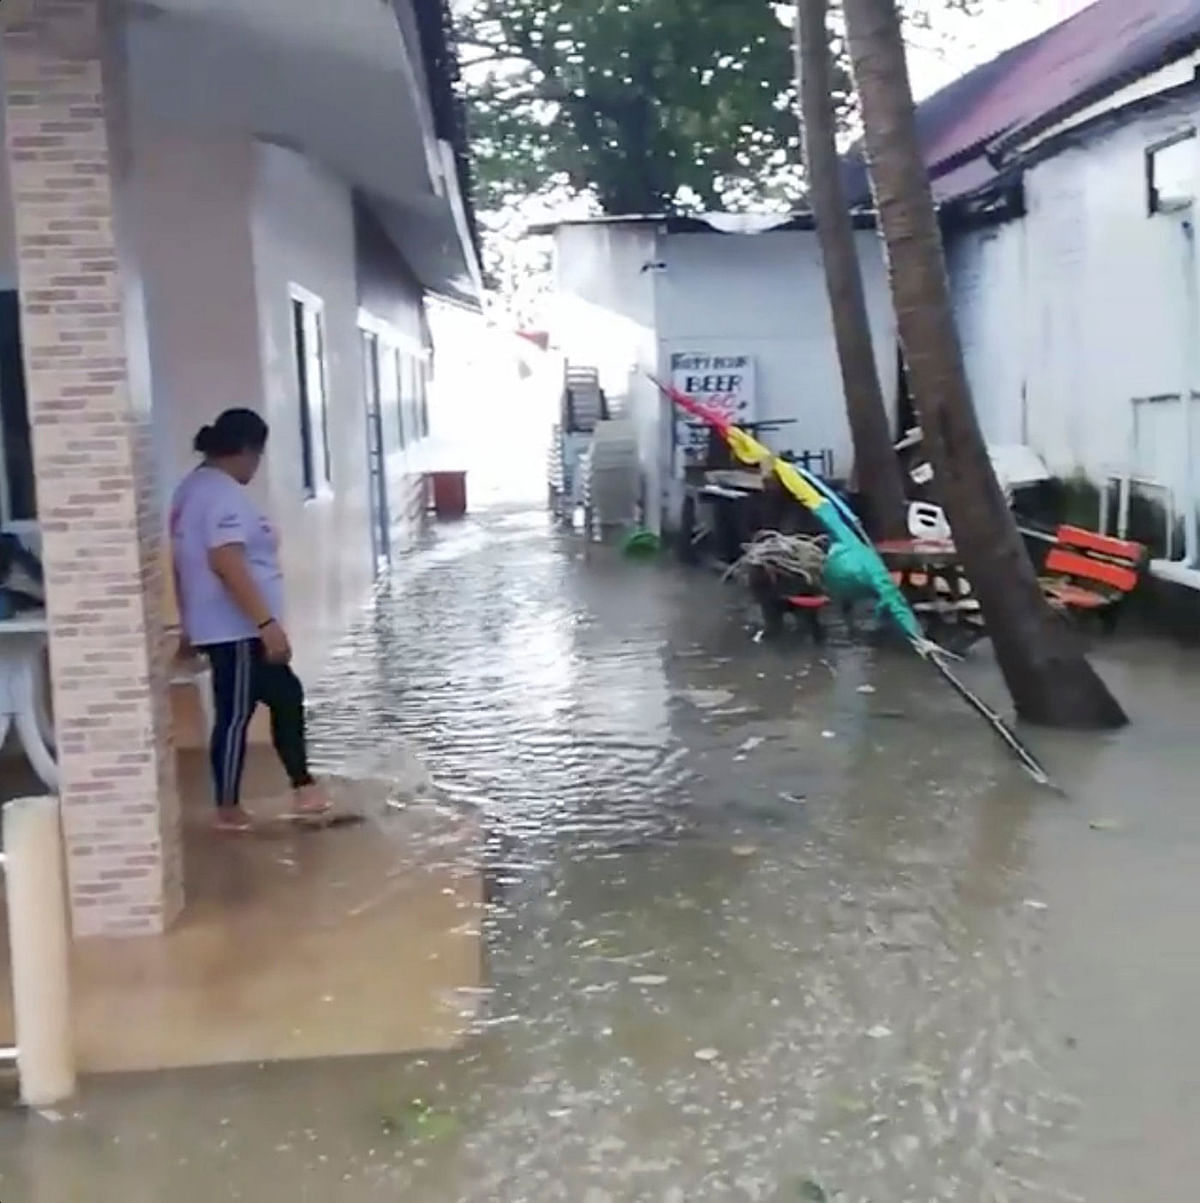 Flooding is seen around a villa near Chaweng Beach in Koh Samui, Thailand on 5 January 2019 in this still image taken from a video obtained from social media. Photo: Reuters